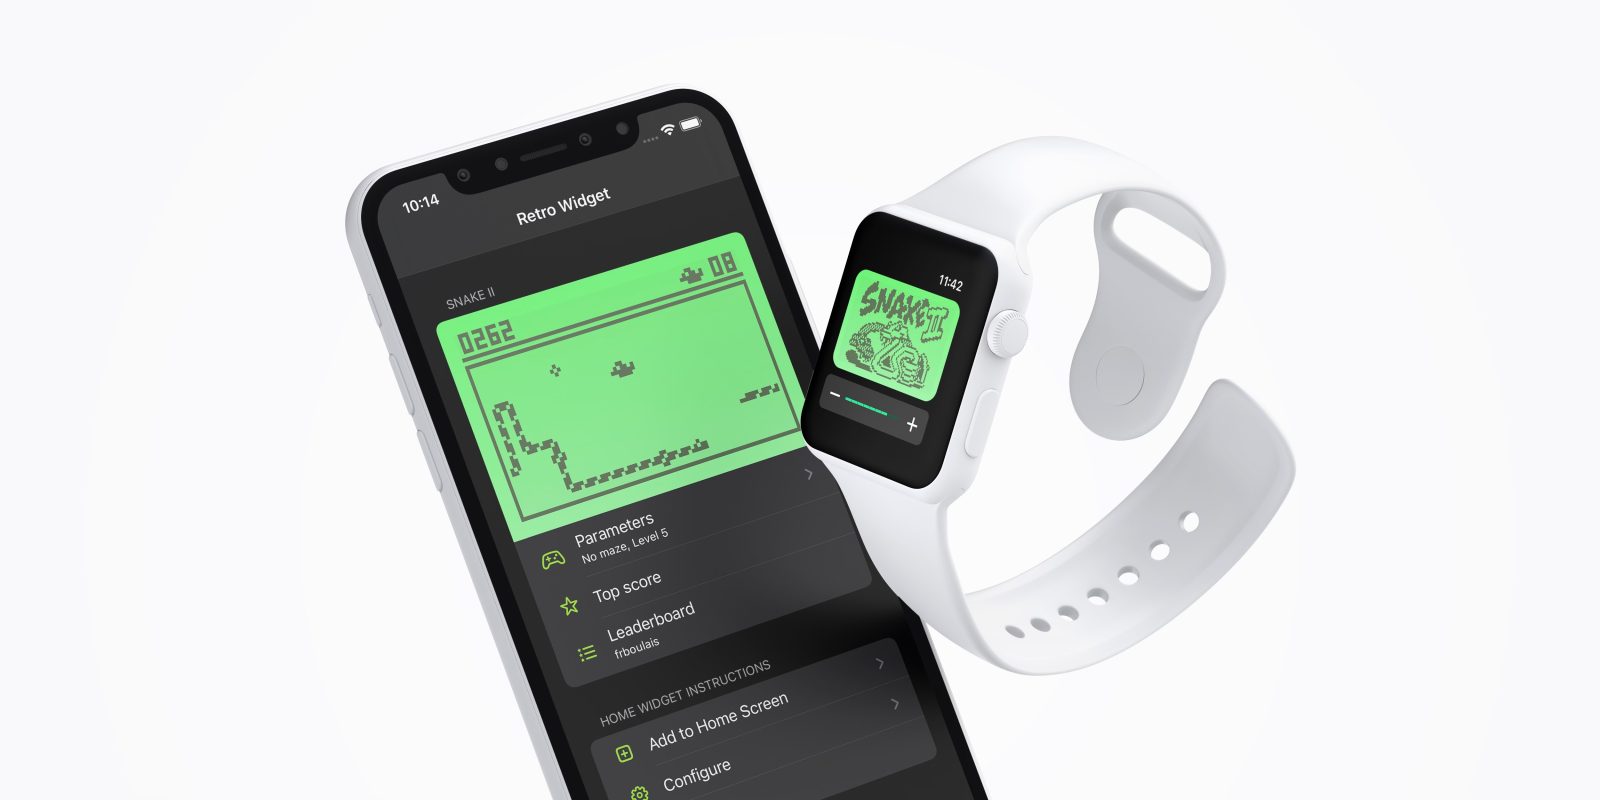 Snake game iPhone widget and Apple Watch app